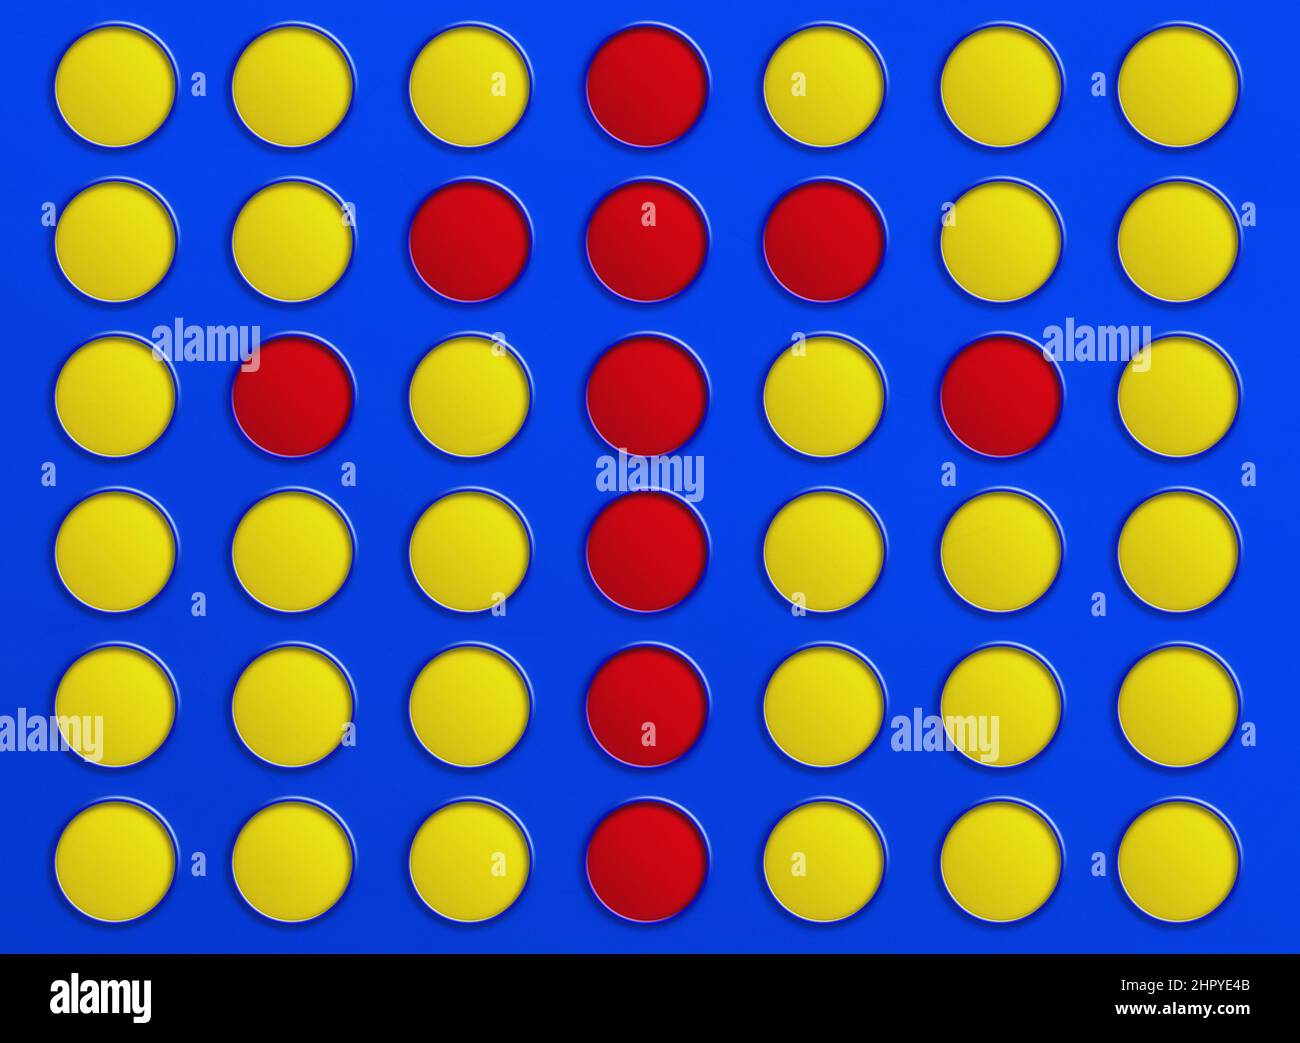 Connect four game with up arrow illustration Stock Photo